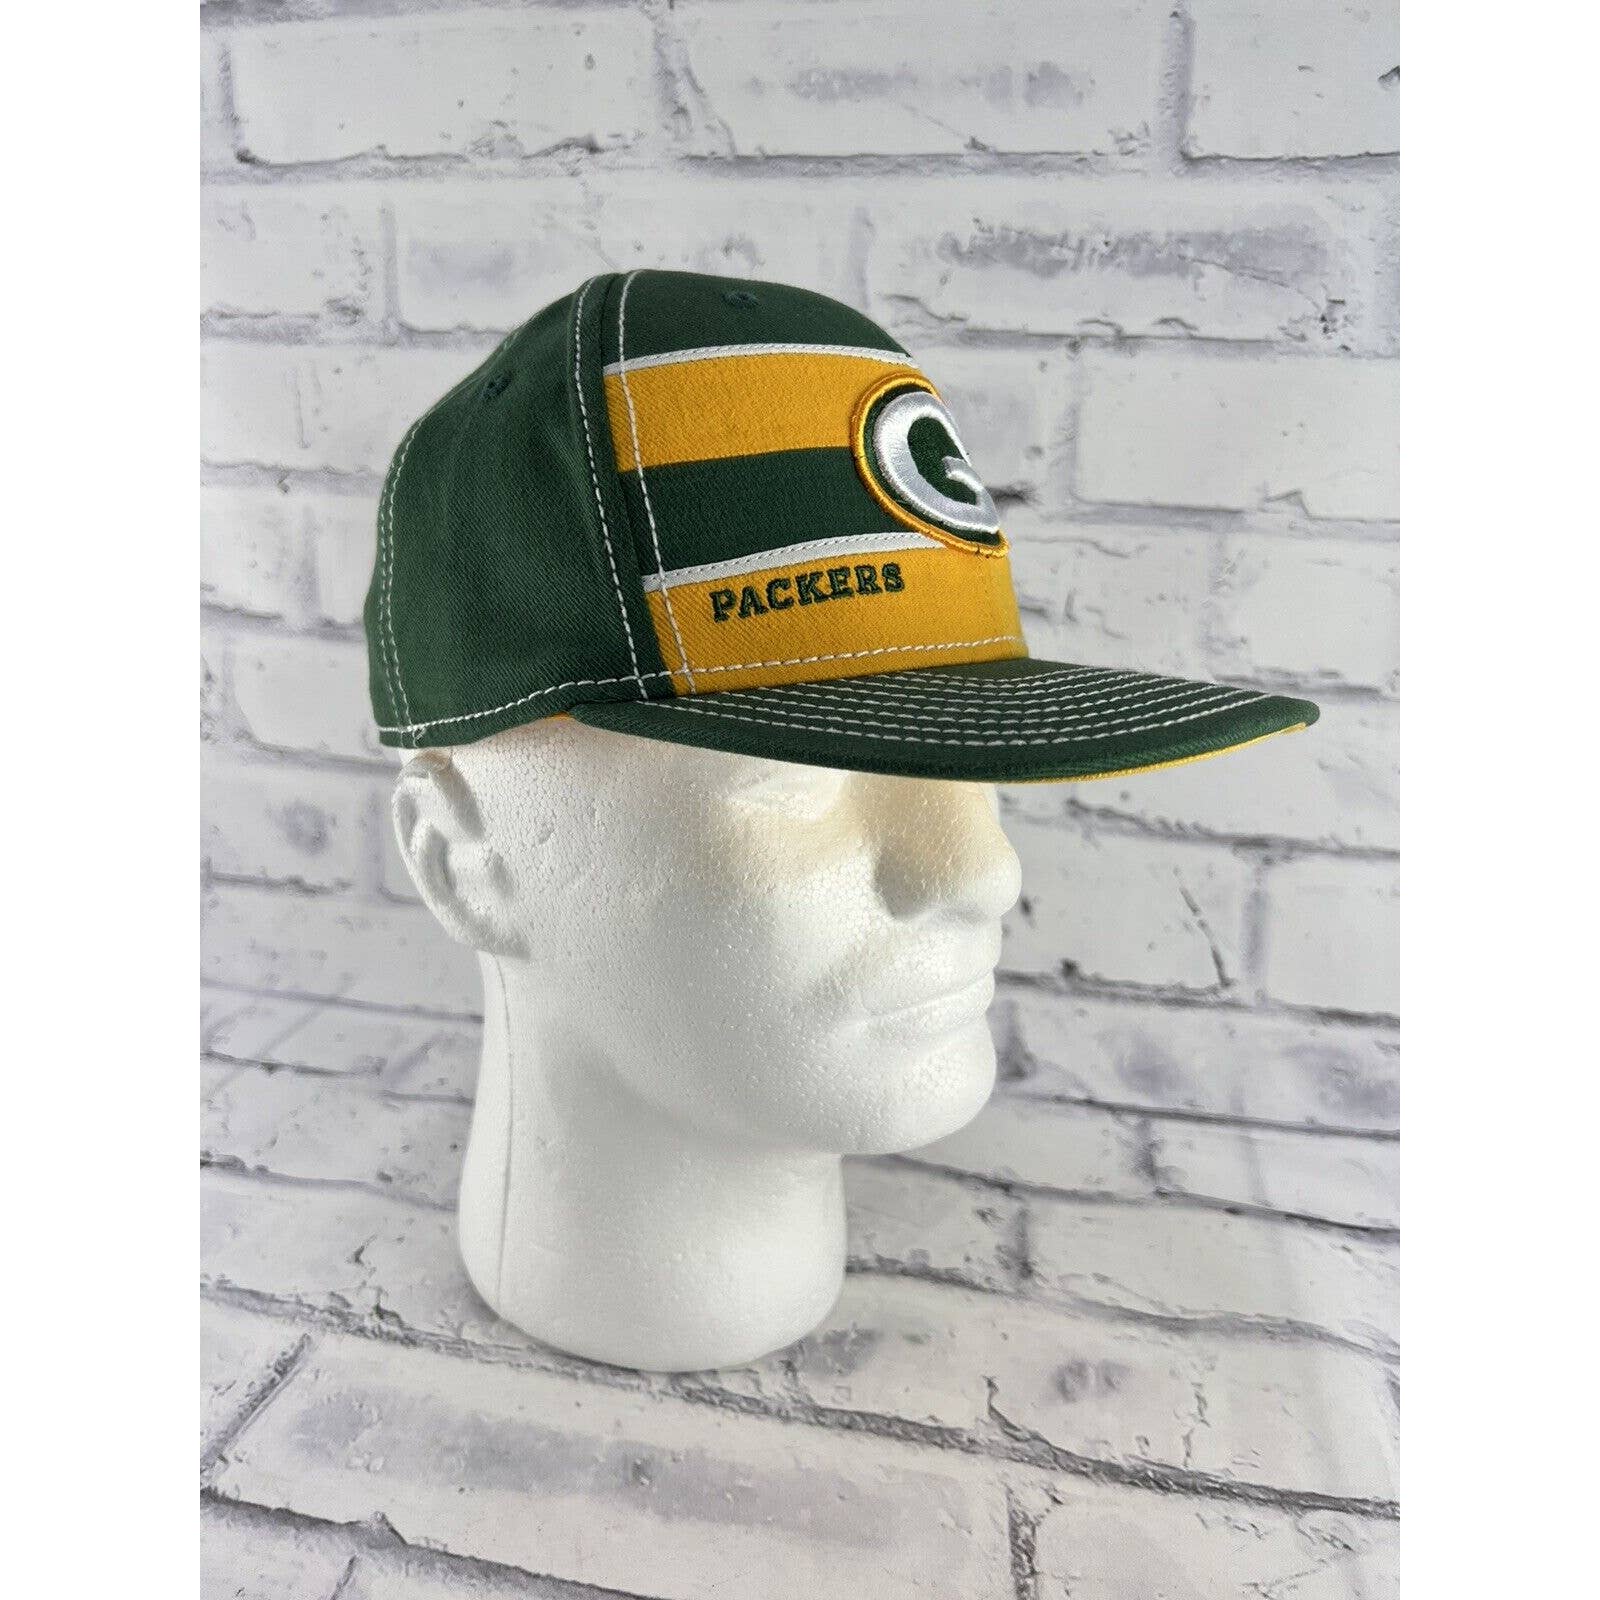 Green Bay Packers Hat Baseball Reebok Onfield Cap Fitted NFL Football S/M Retro